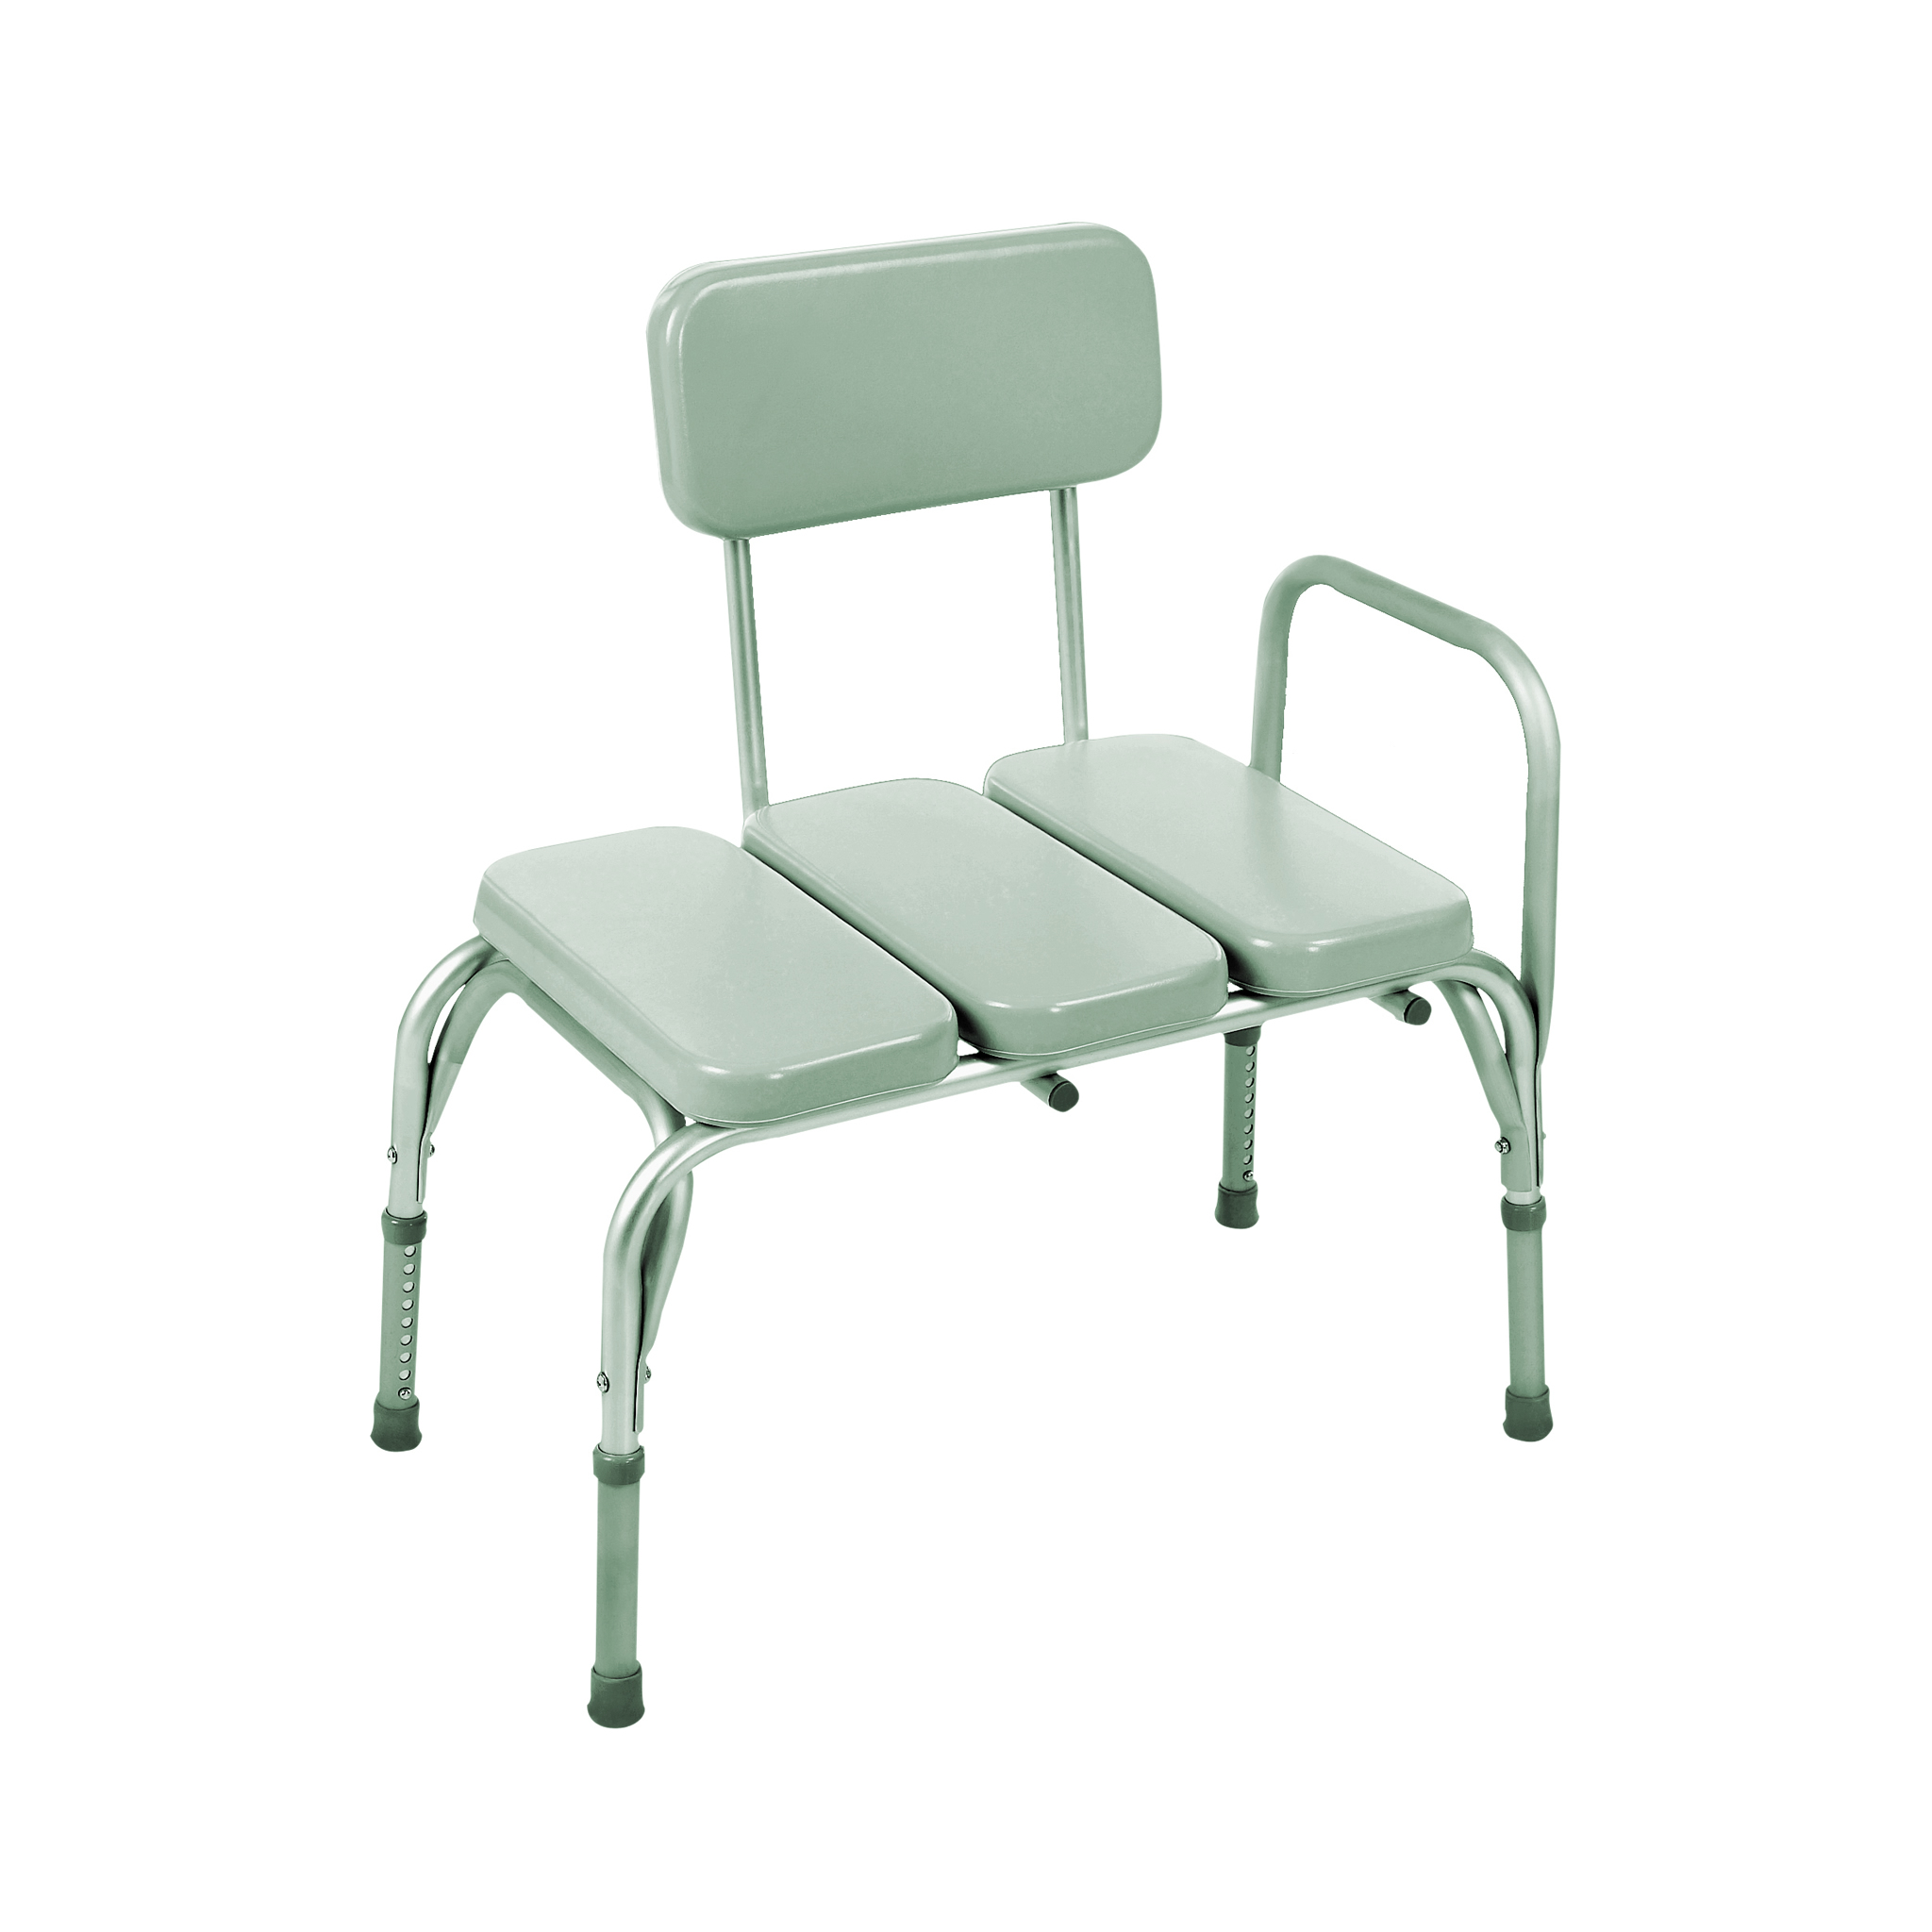 Bath Chairs, Stools and Benches